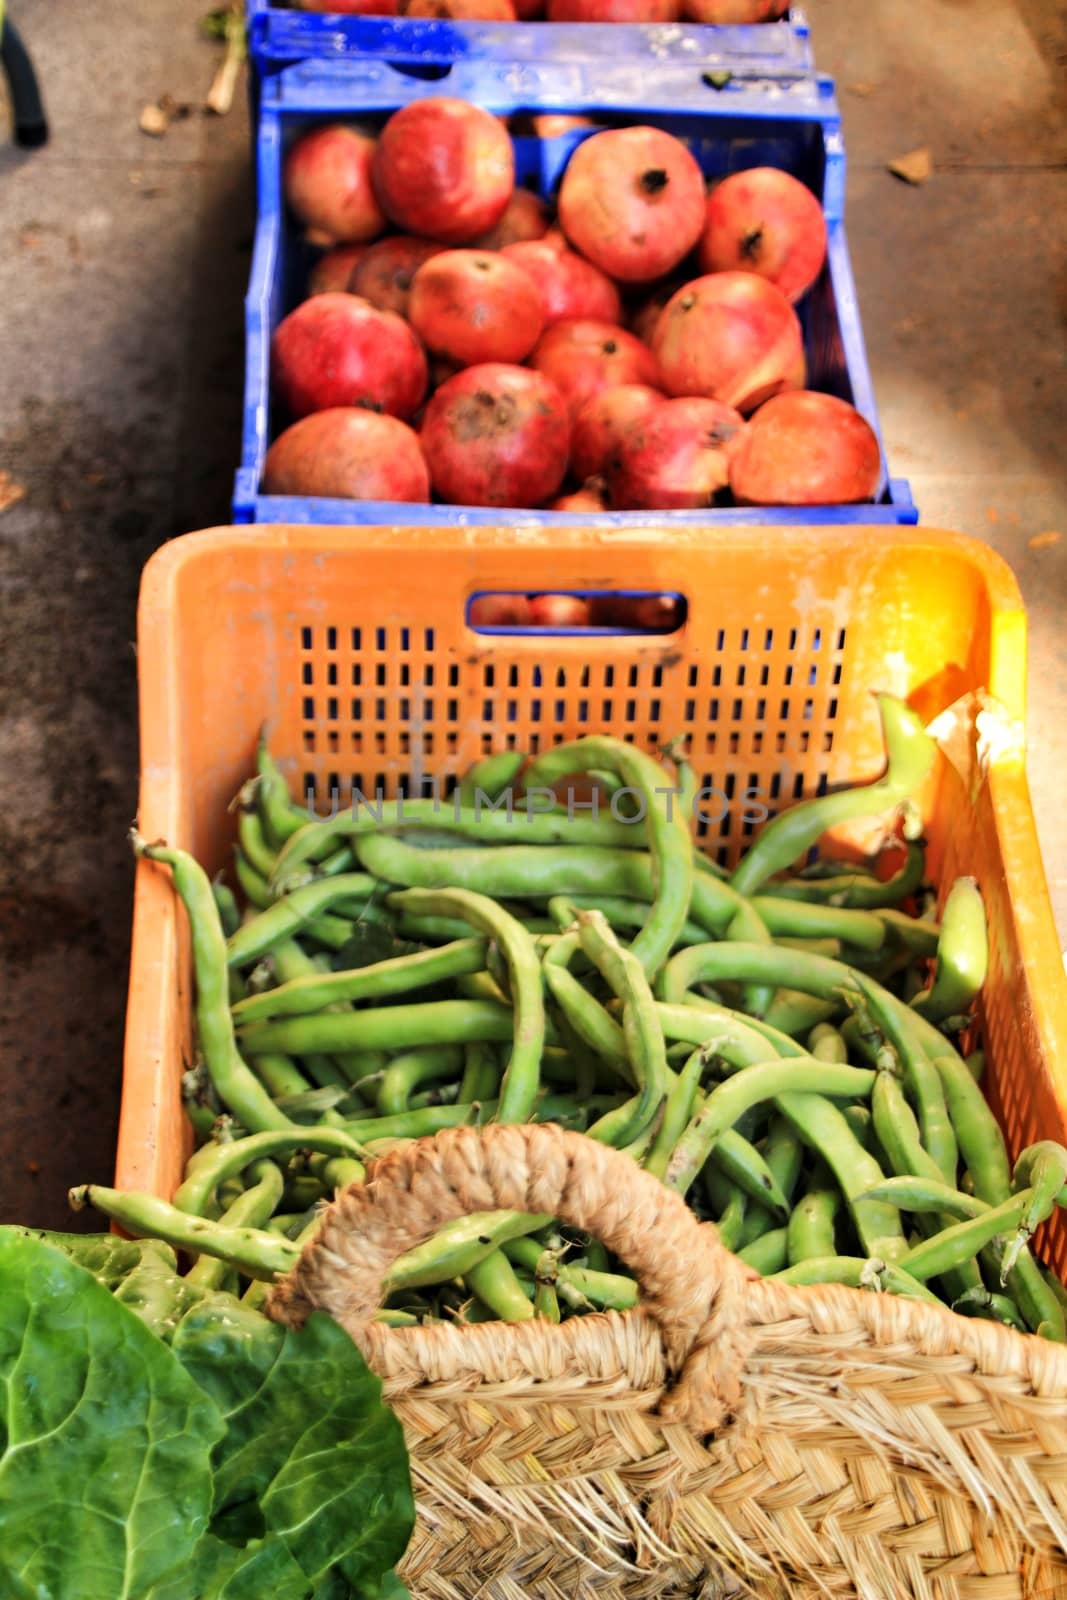 Green vegetables and grenades for sale at a ecological market stall by soniabonet